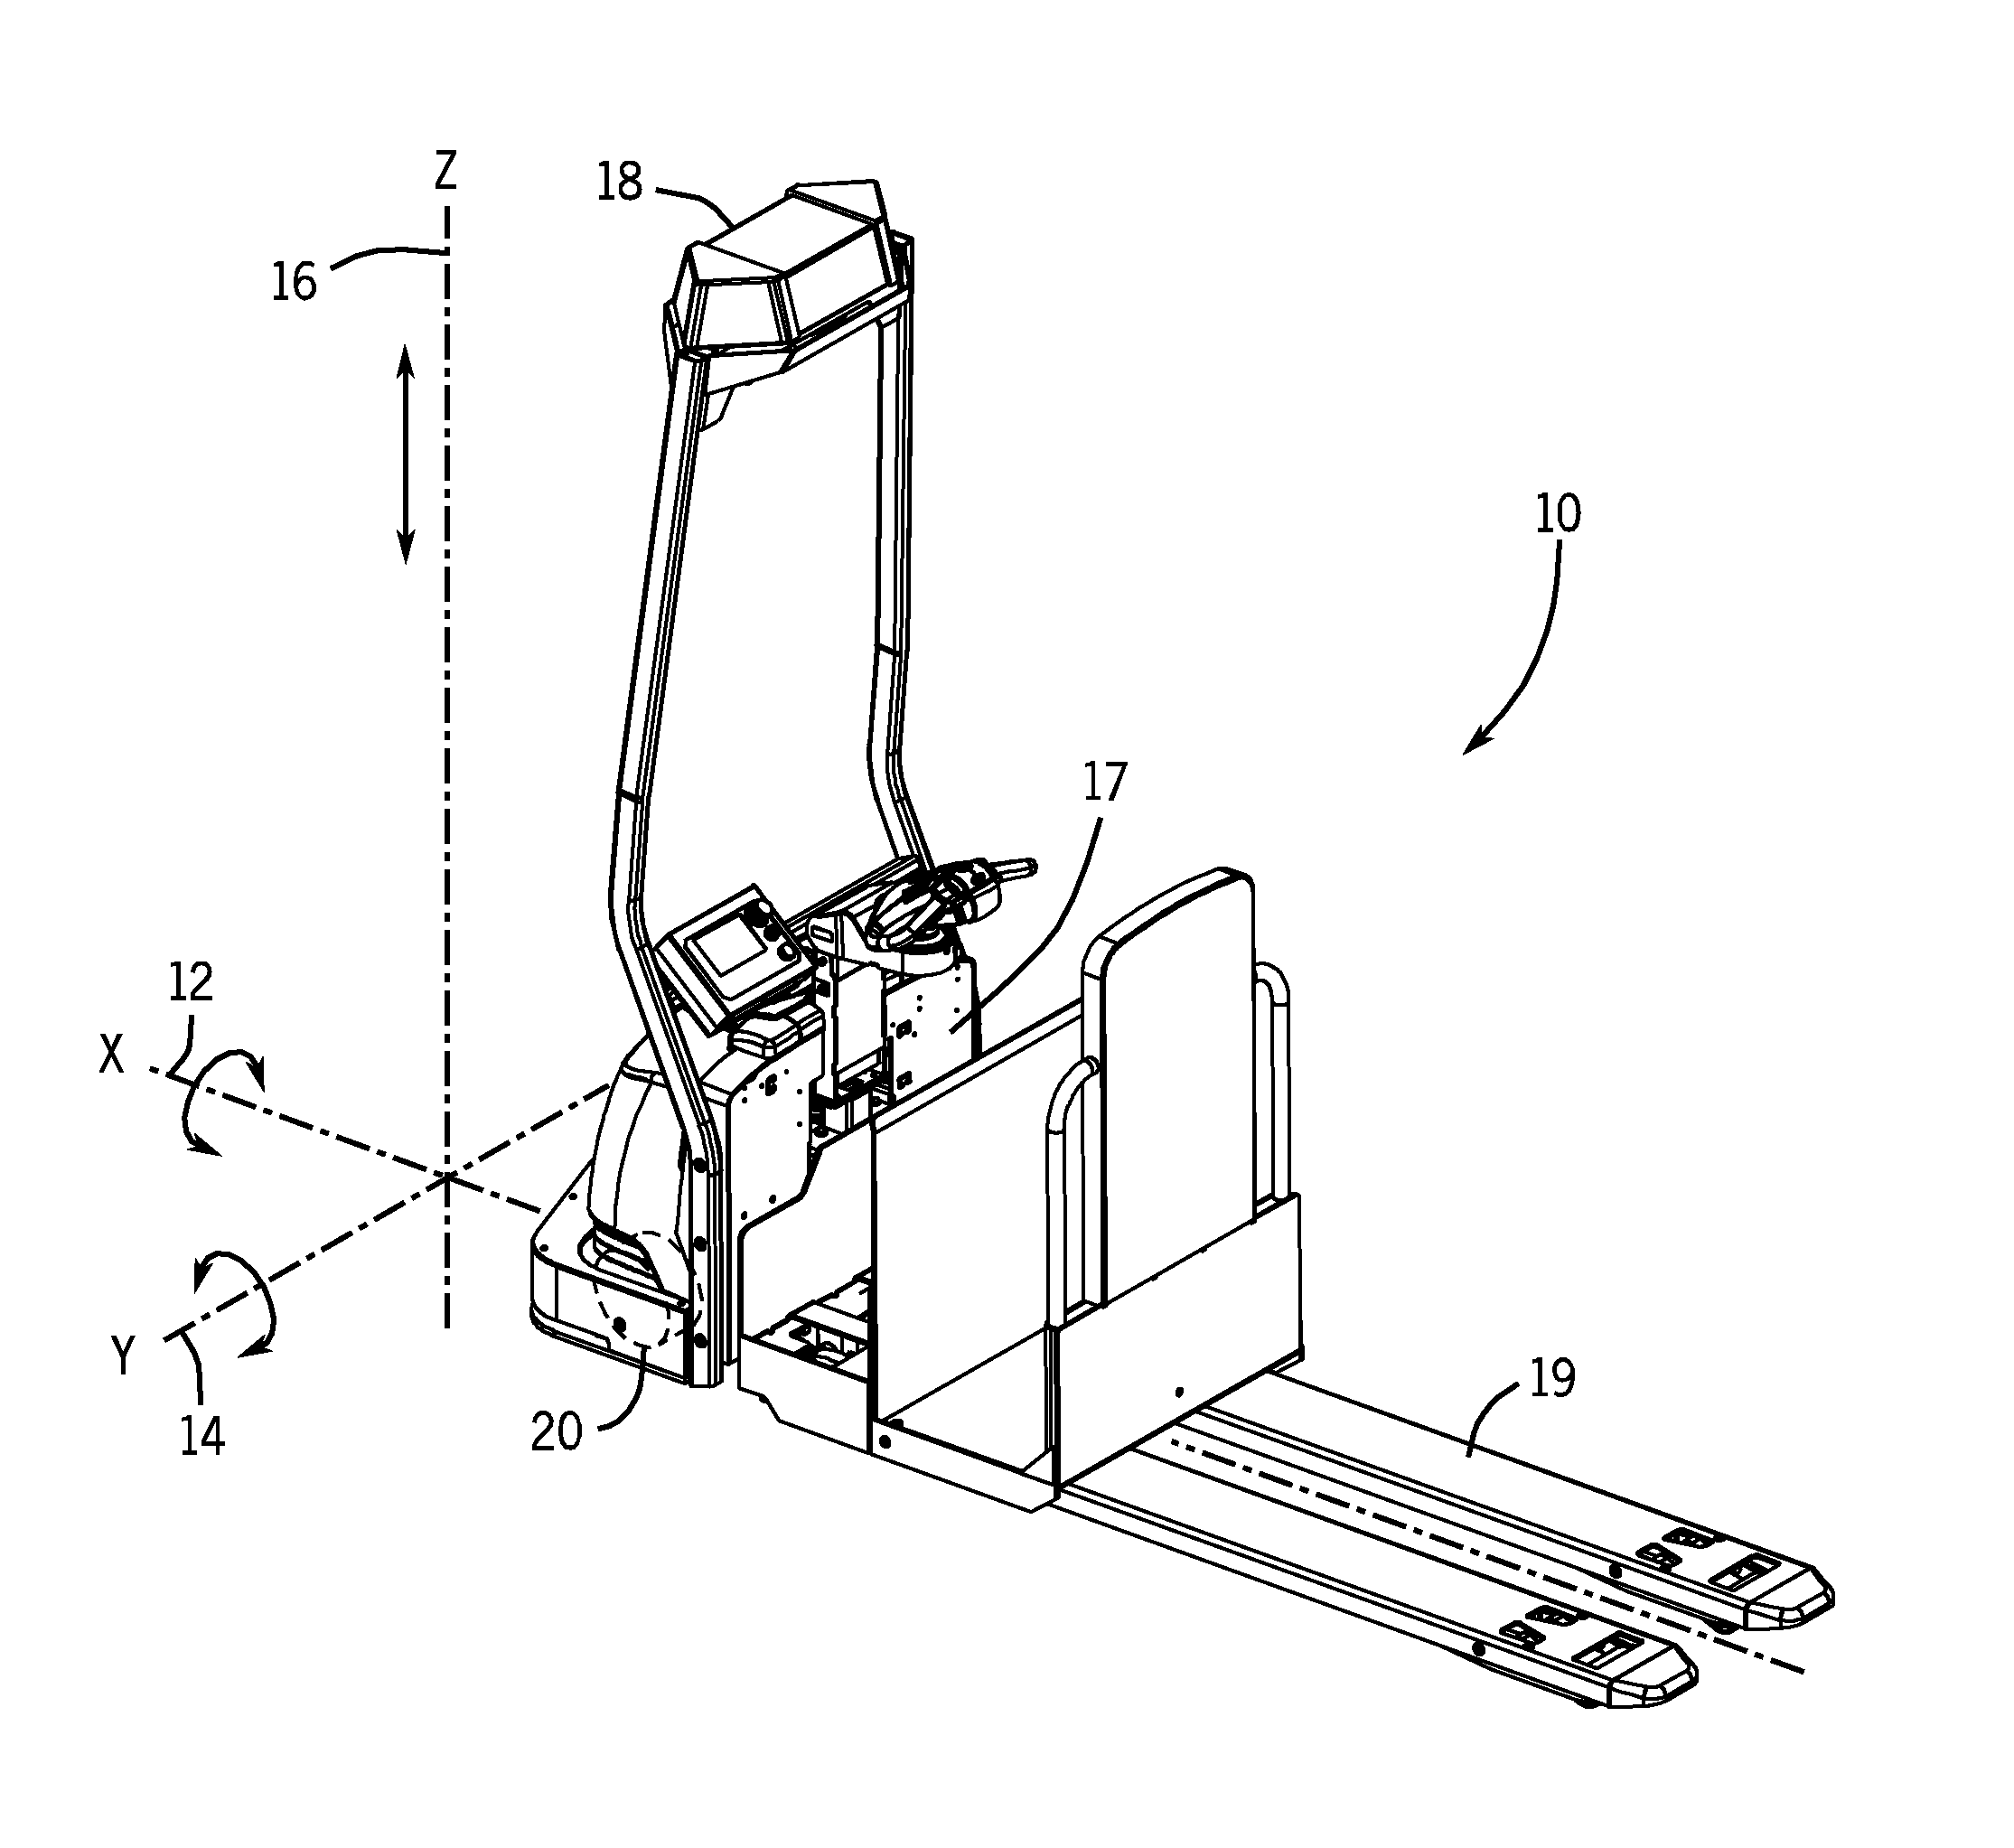 Dynamic Stability Control Systems and Methods for Industrial Lift Trucks